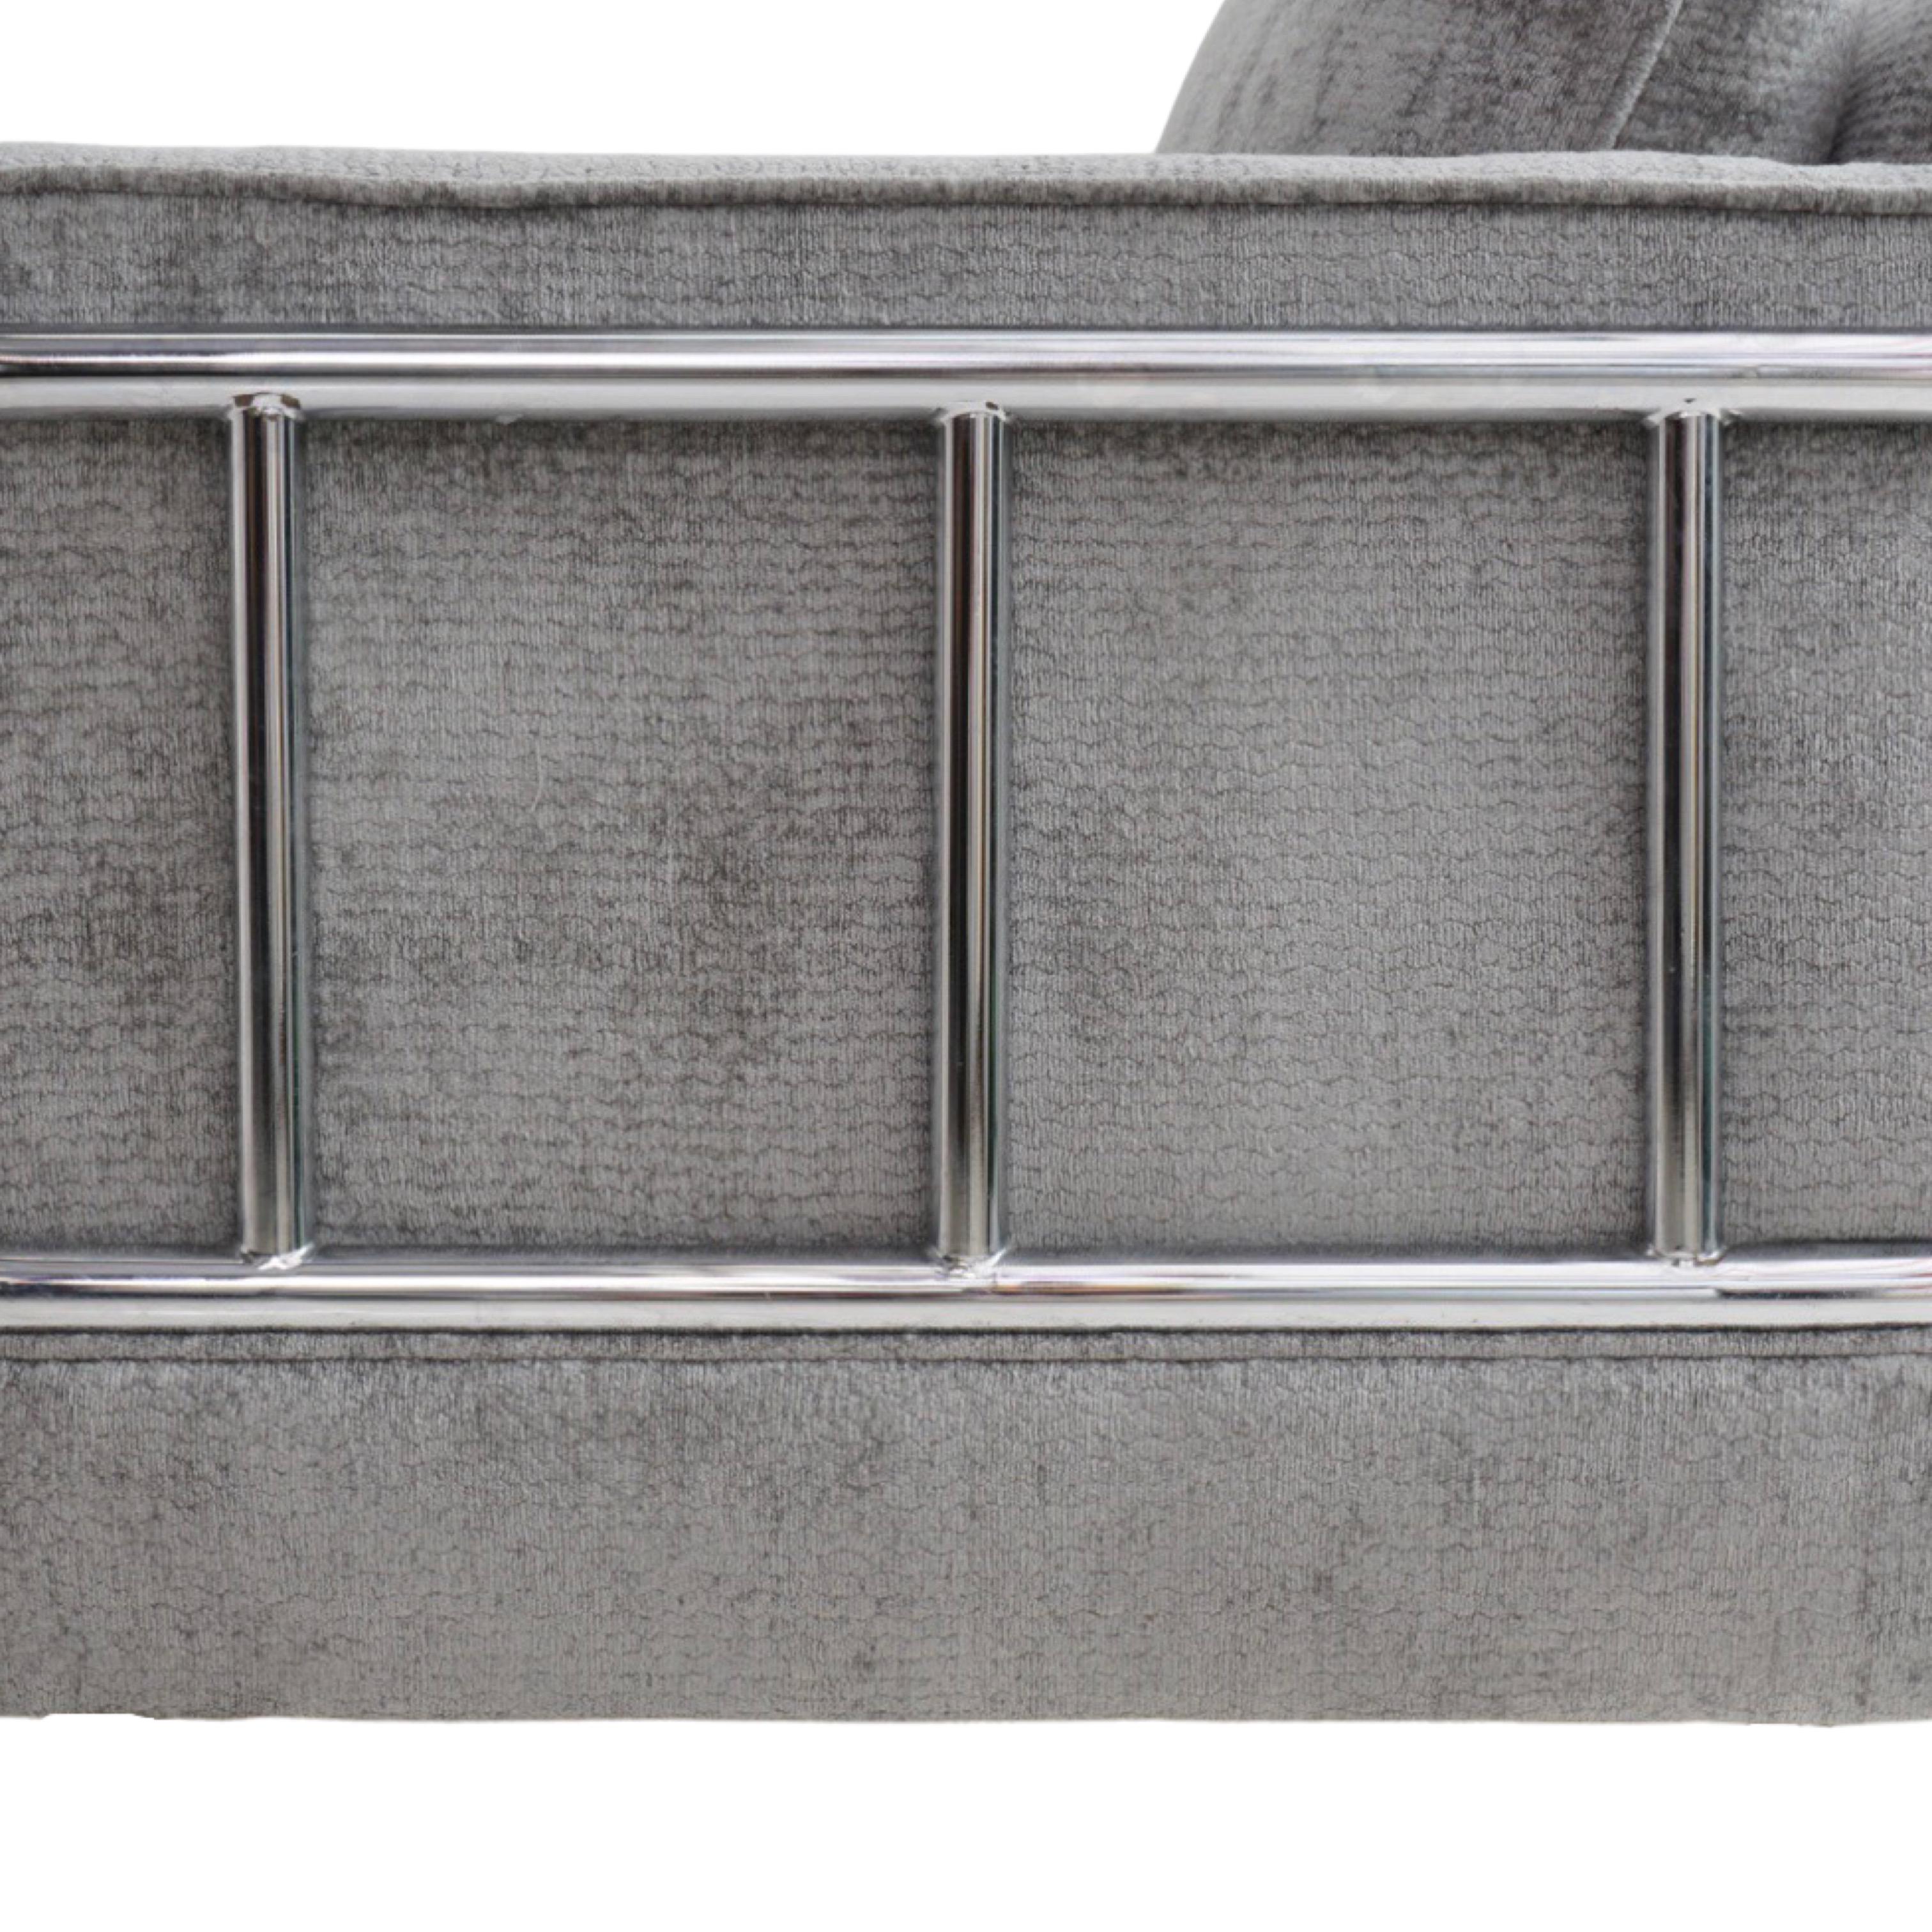 Mid-20th Century Chrome Caged Loveseat, 1960s For Sale